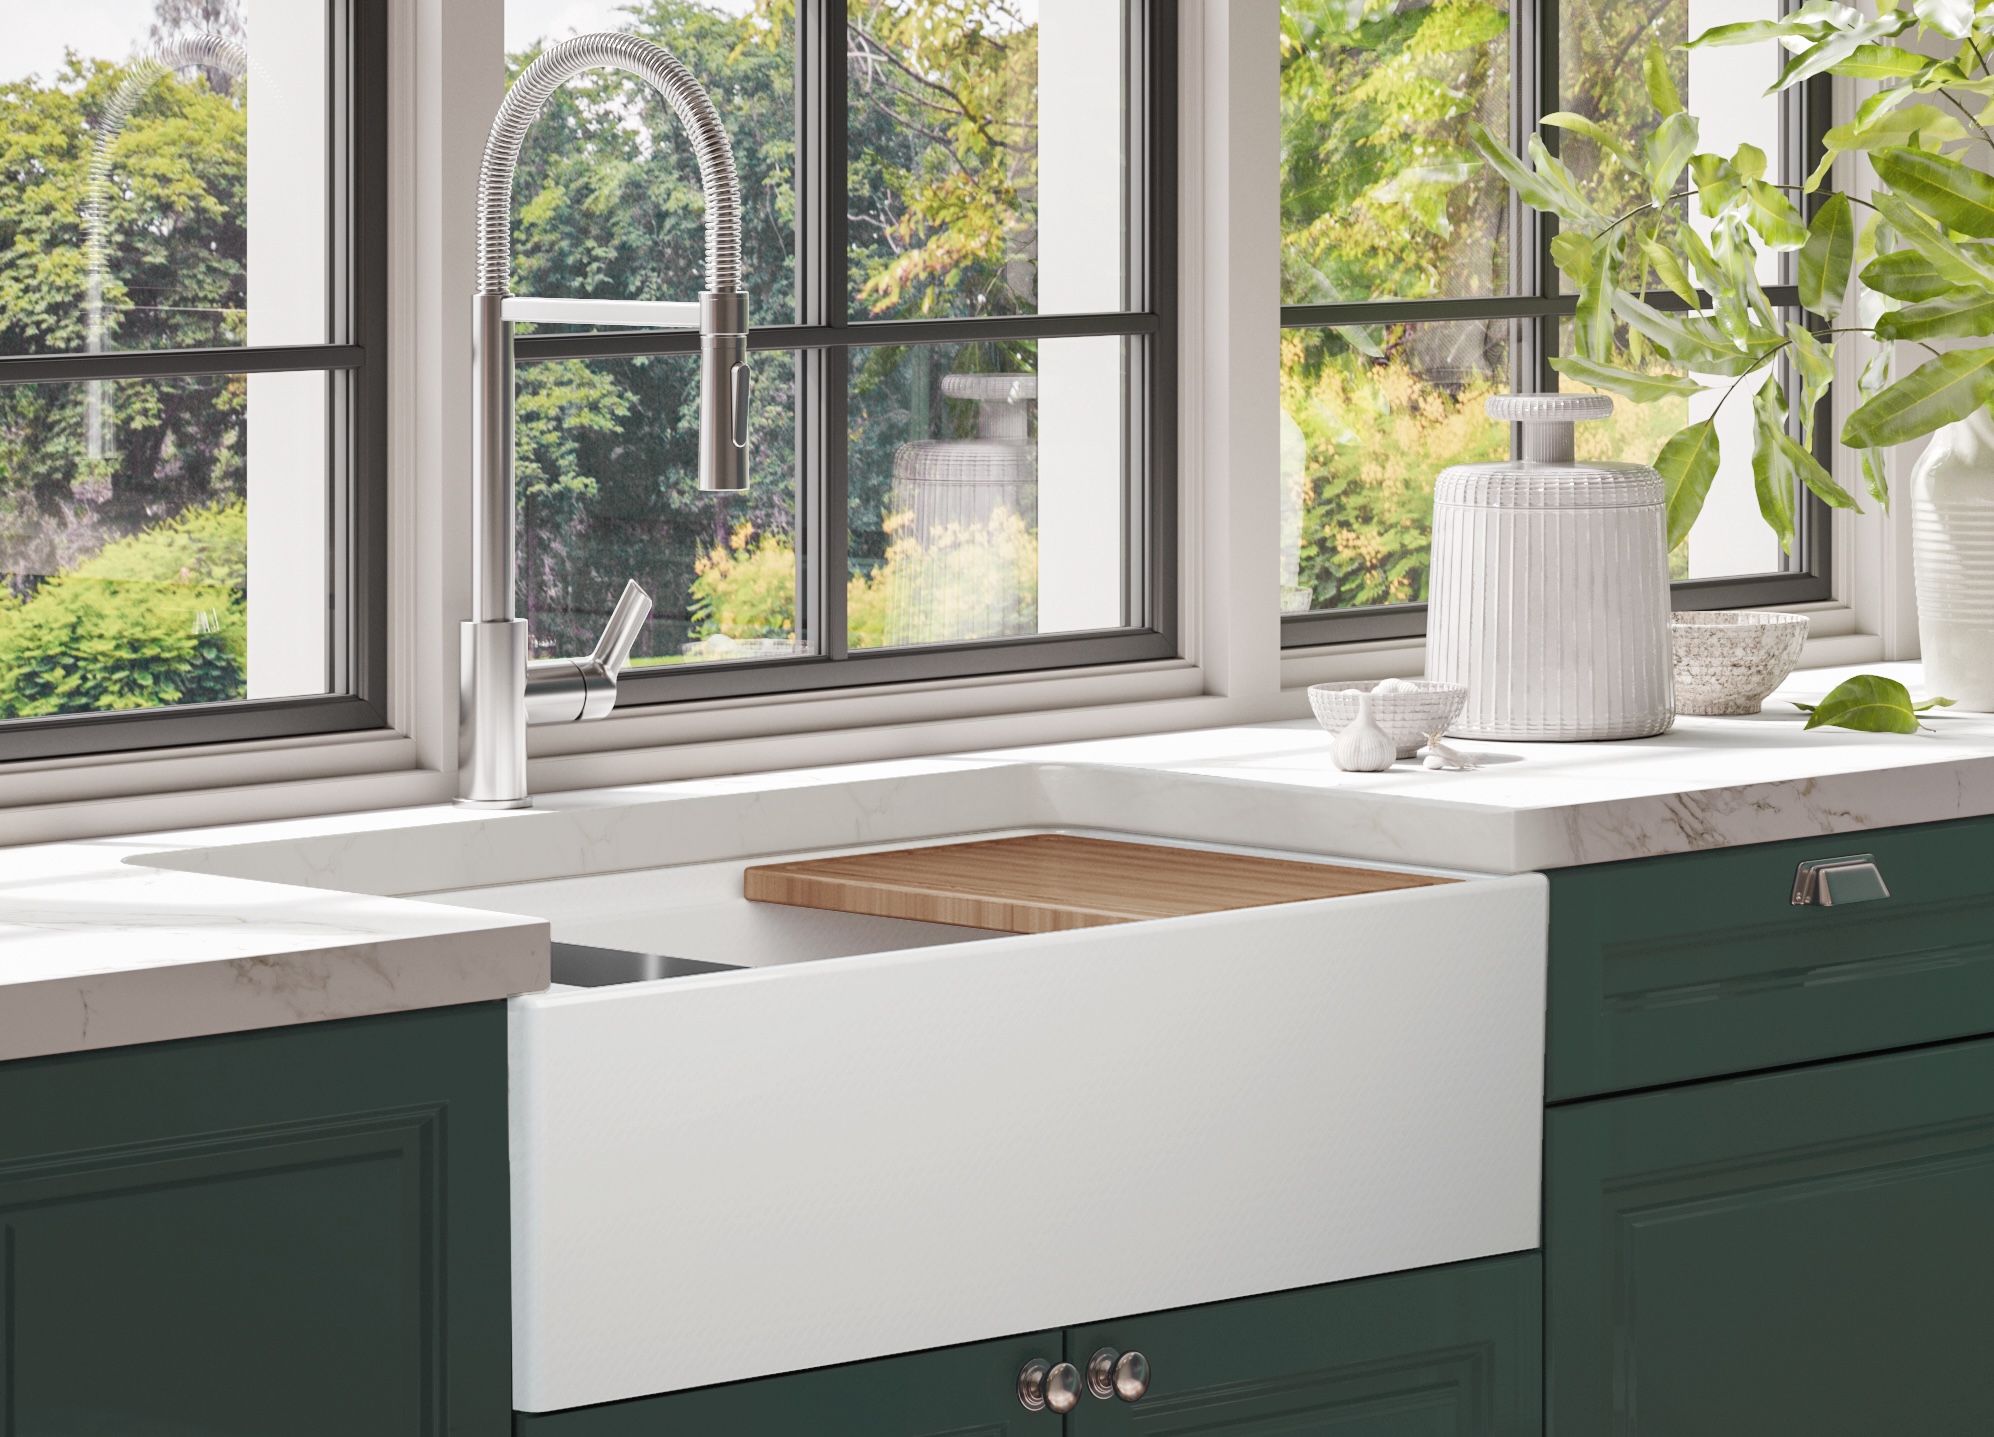 Odessa Obsession: style meets function with our fireclay sinks